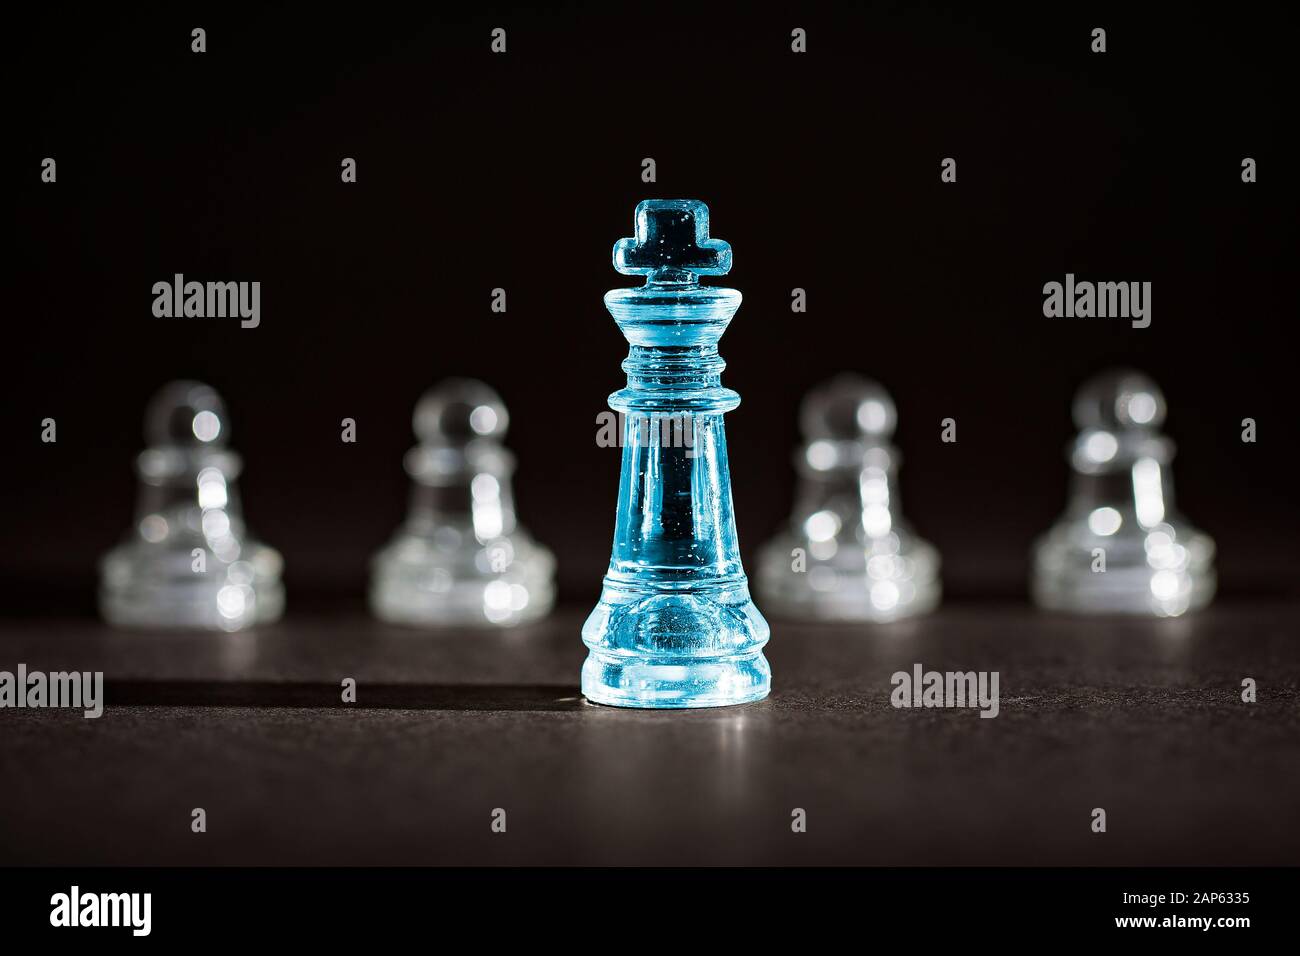 Chess business success, leadership concept. Stock Photo